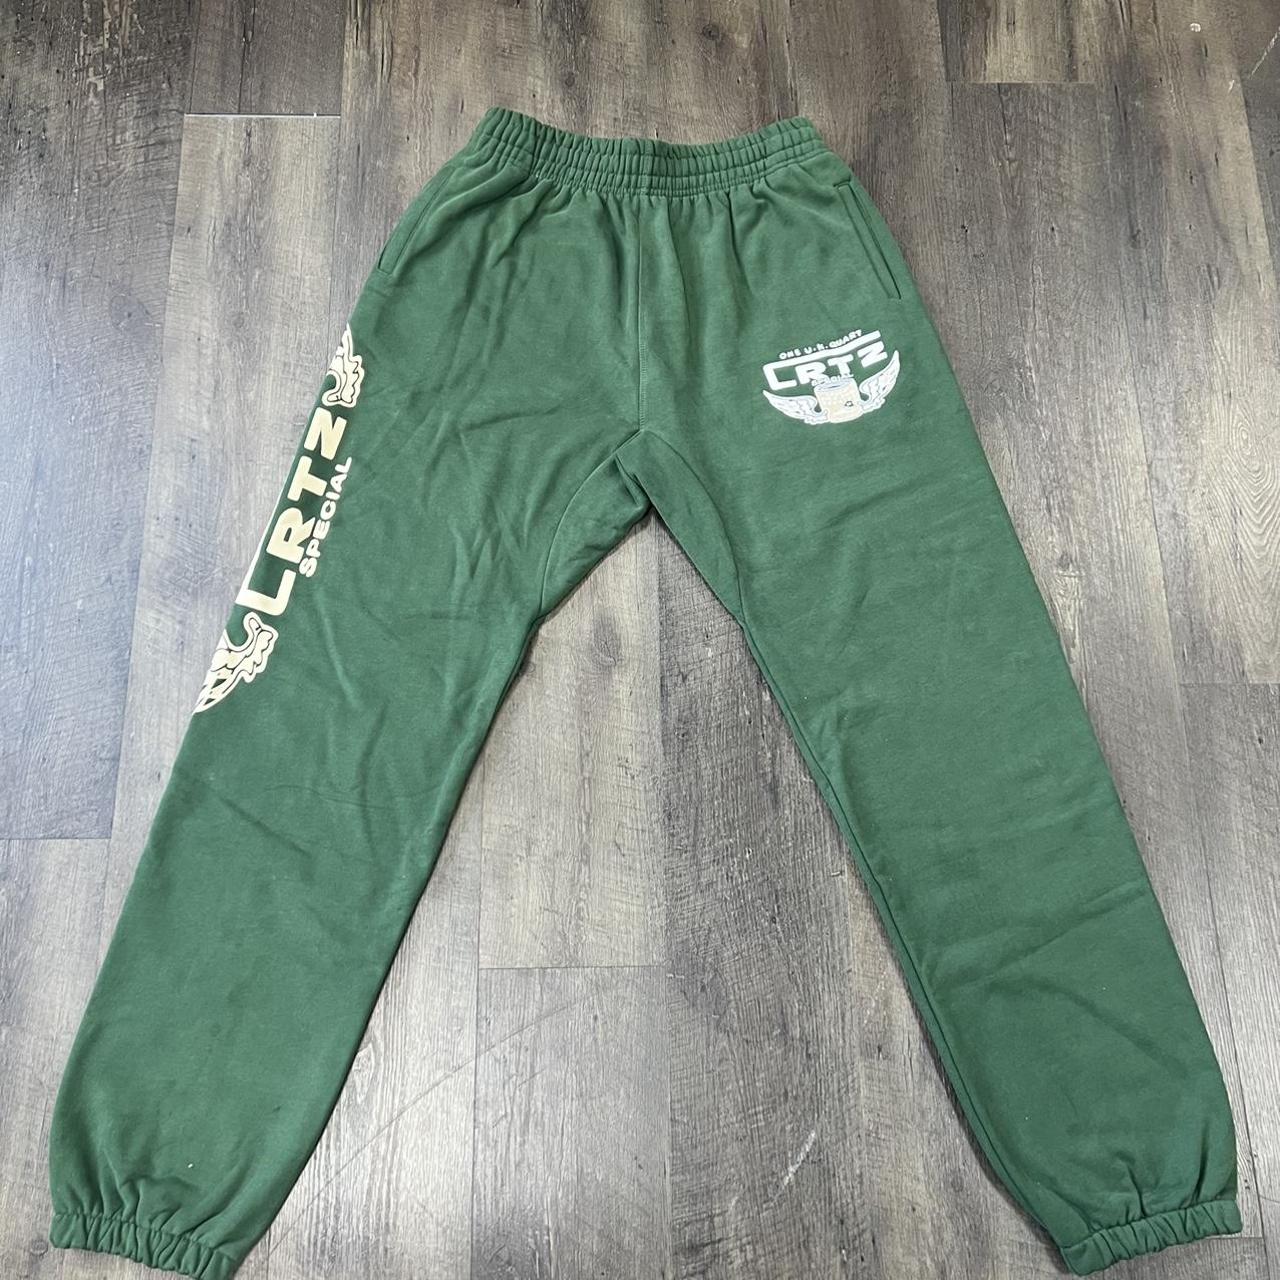 Green Xersion Joggers ⚠️NO PAYPAL PAYMENTS - Depop